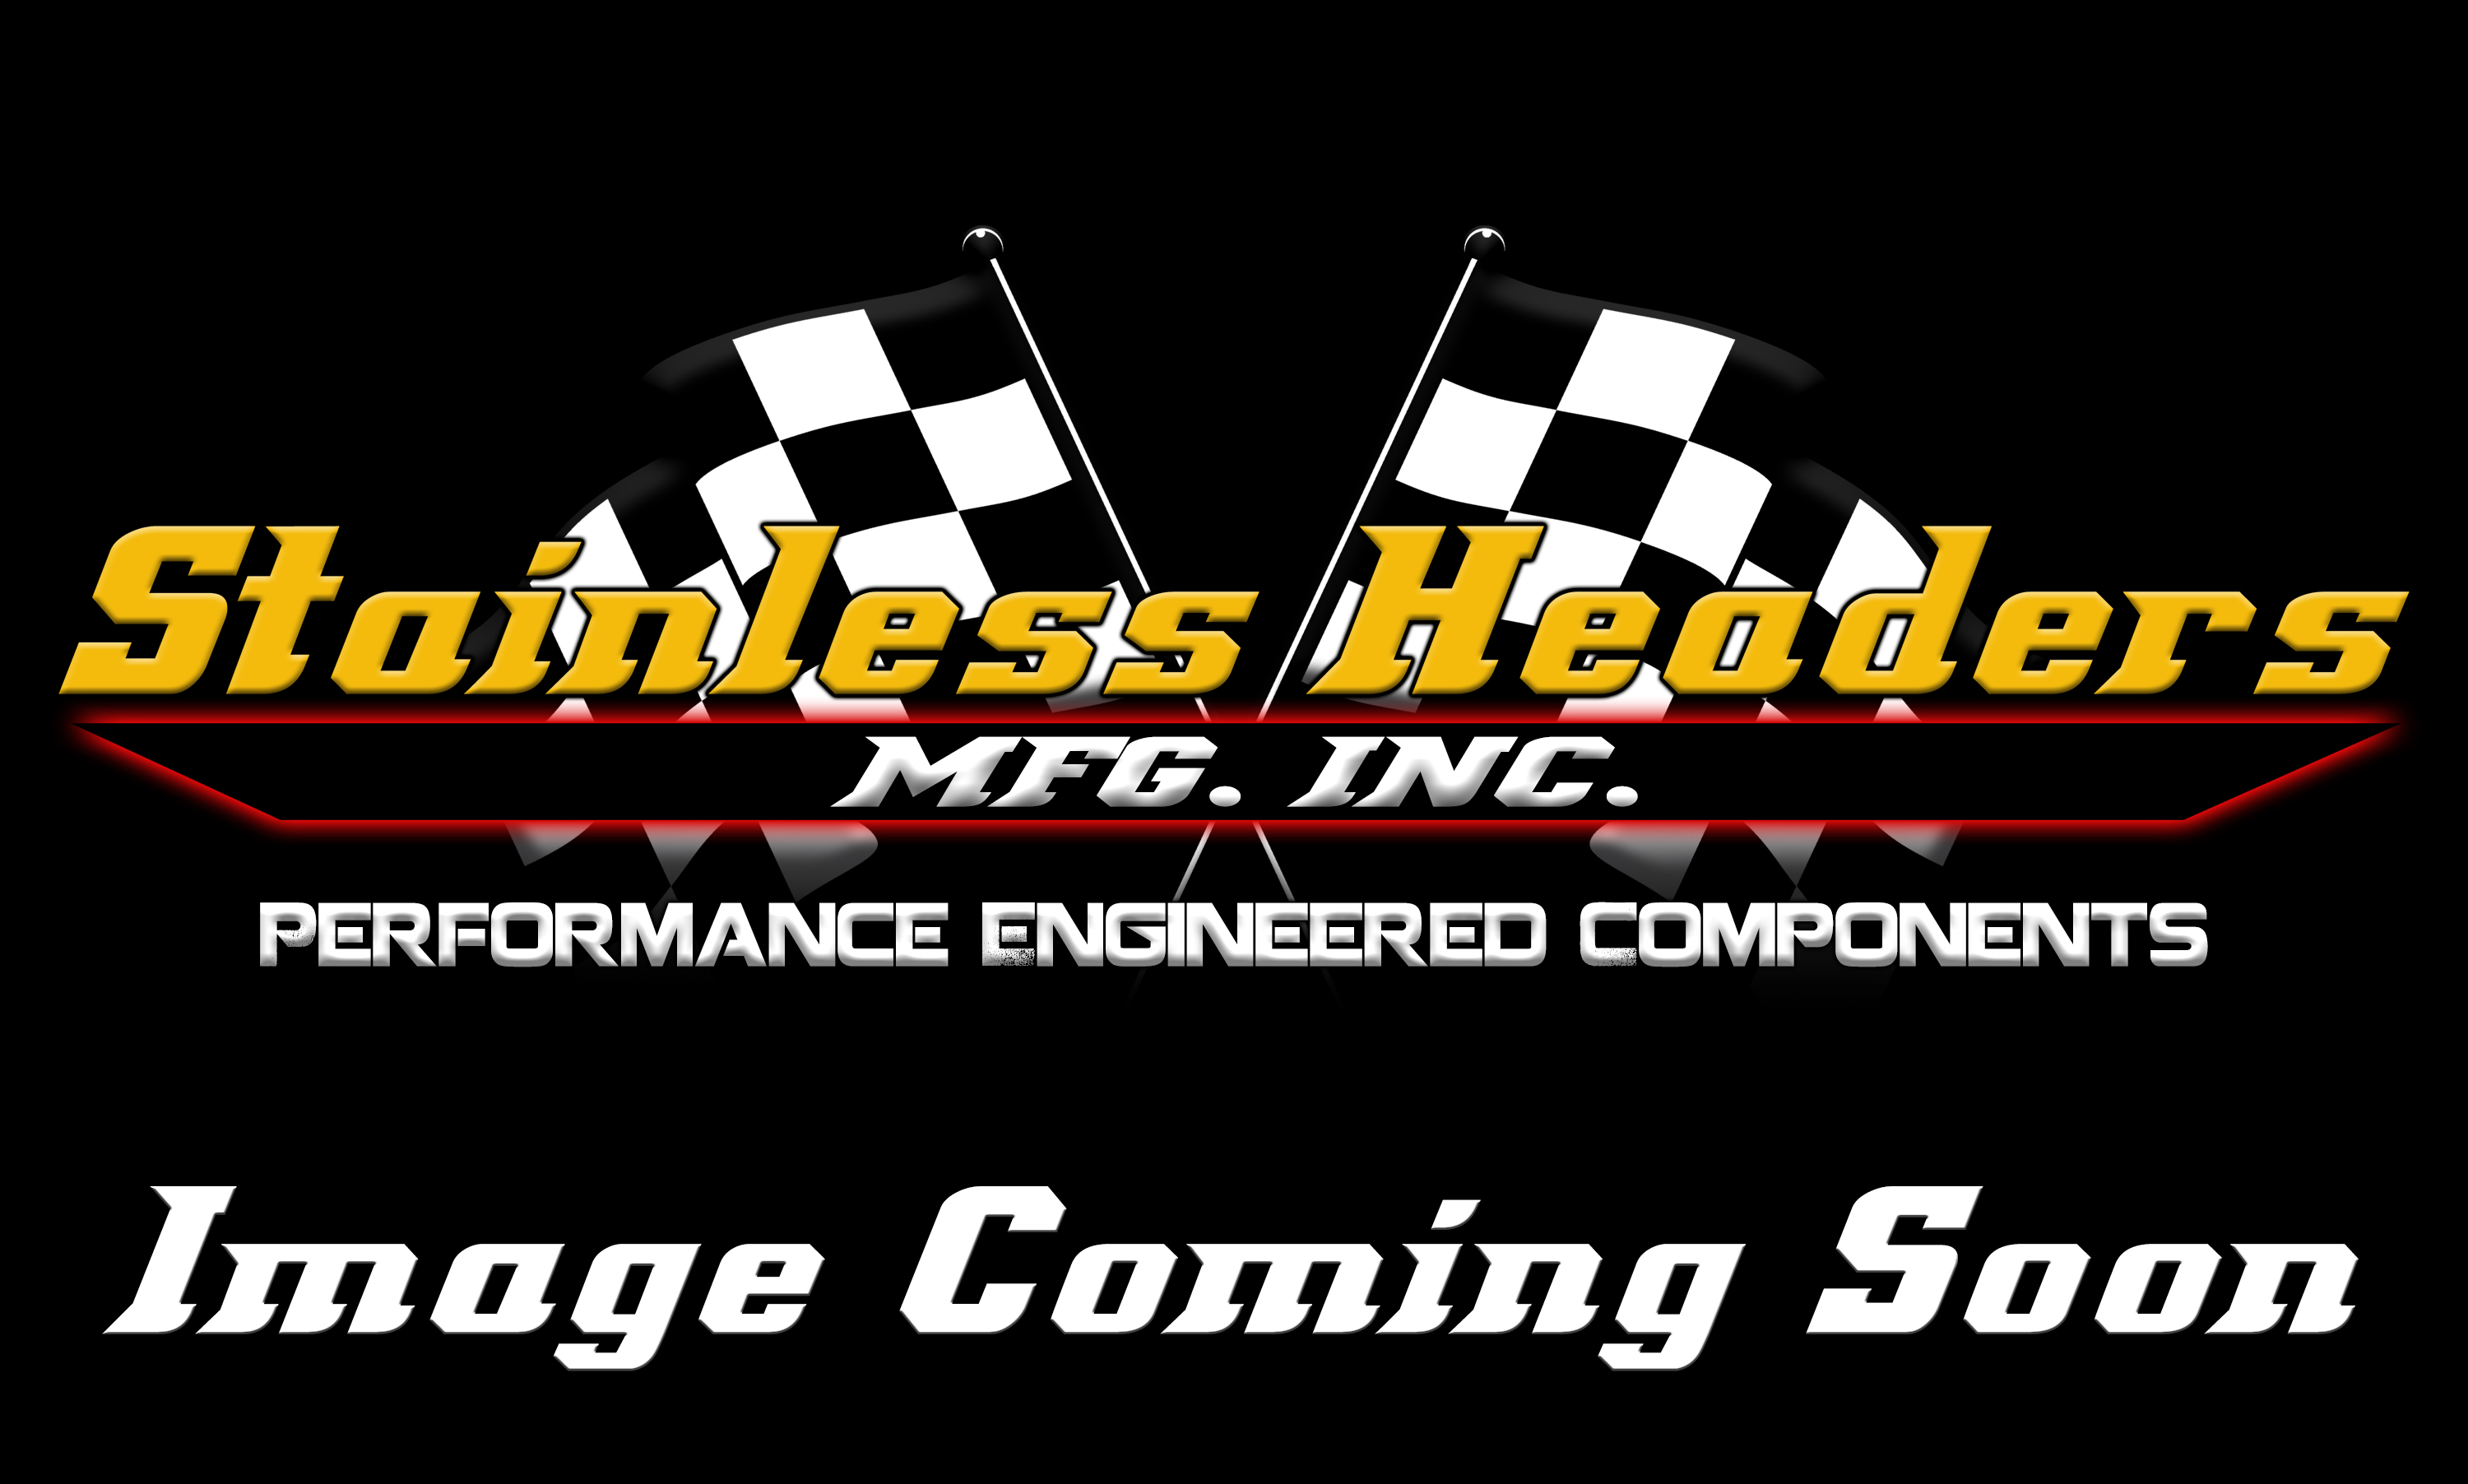 CompTurbo Technologies - CTR4518R-8388 Mid Frame Oil Lubricated 2.0 Turbocharger (1500 HP) - Image 2